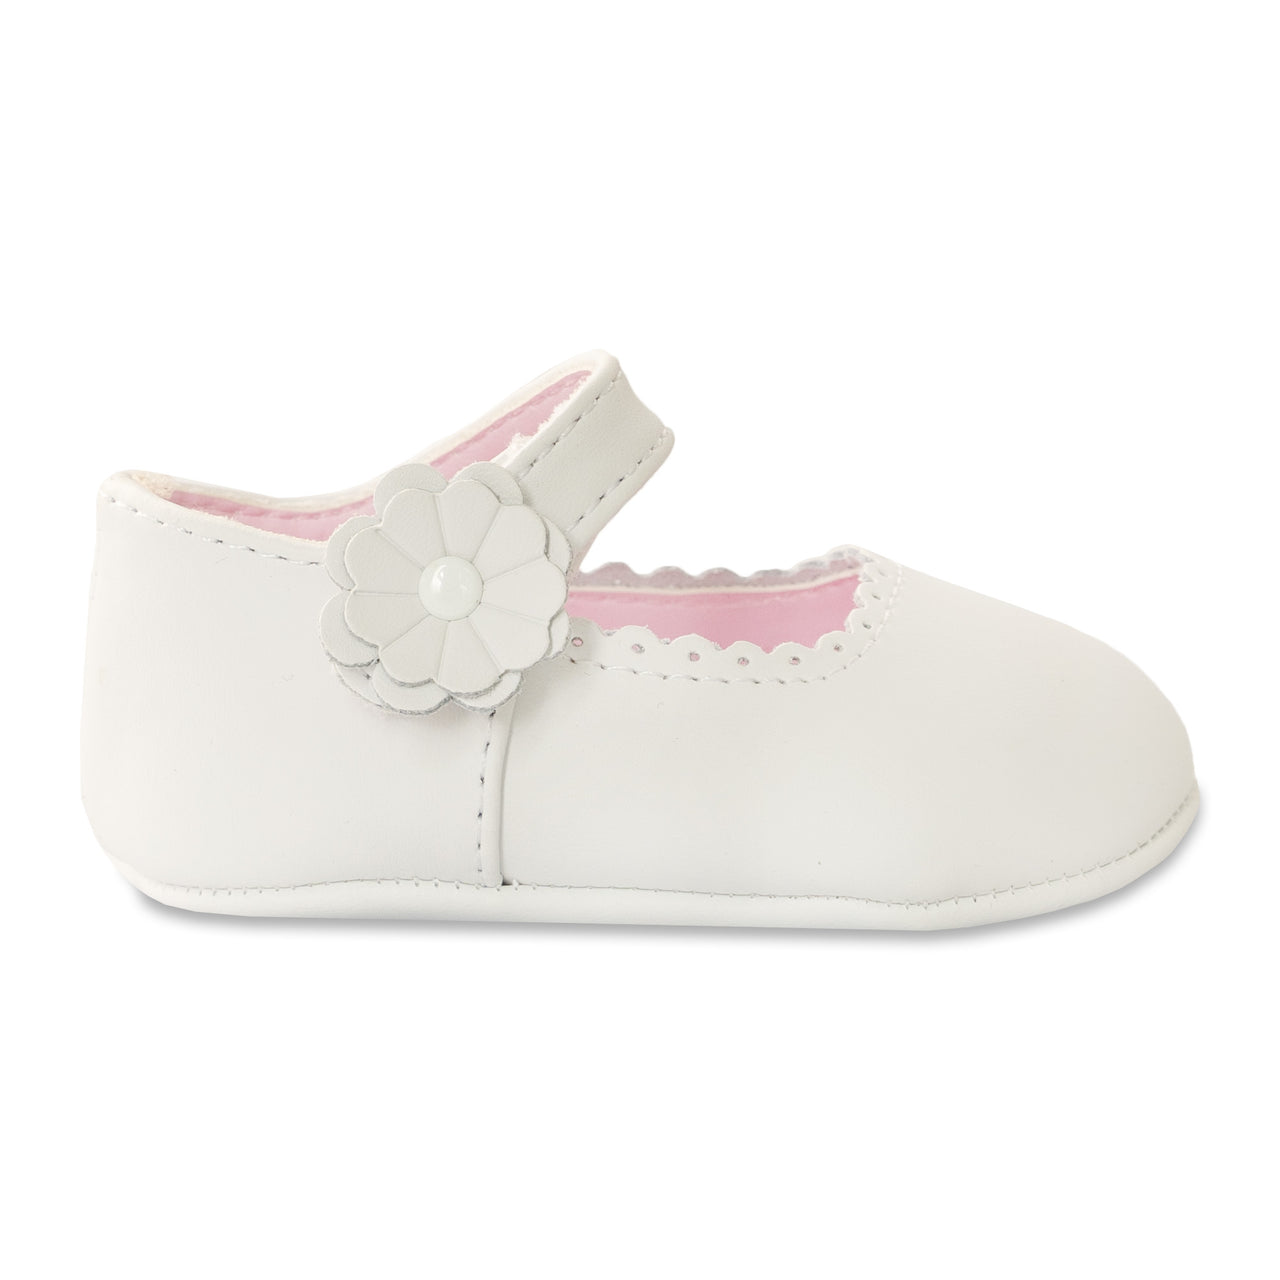 Baby Deer Emma Infant White Leather Mary Jane Flats 4092